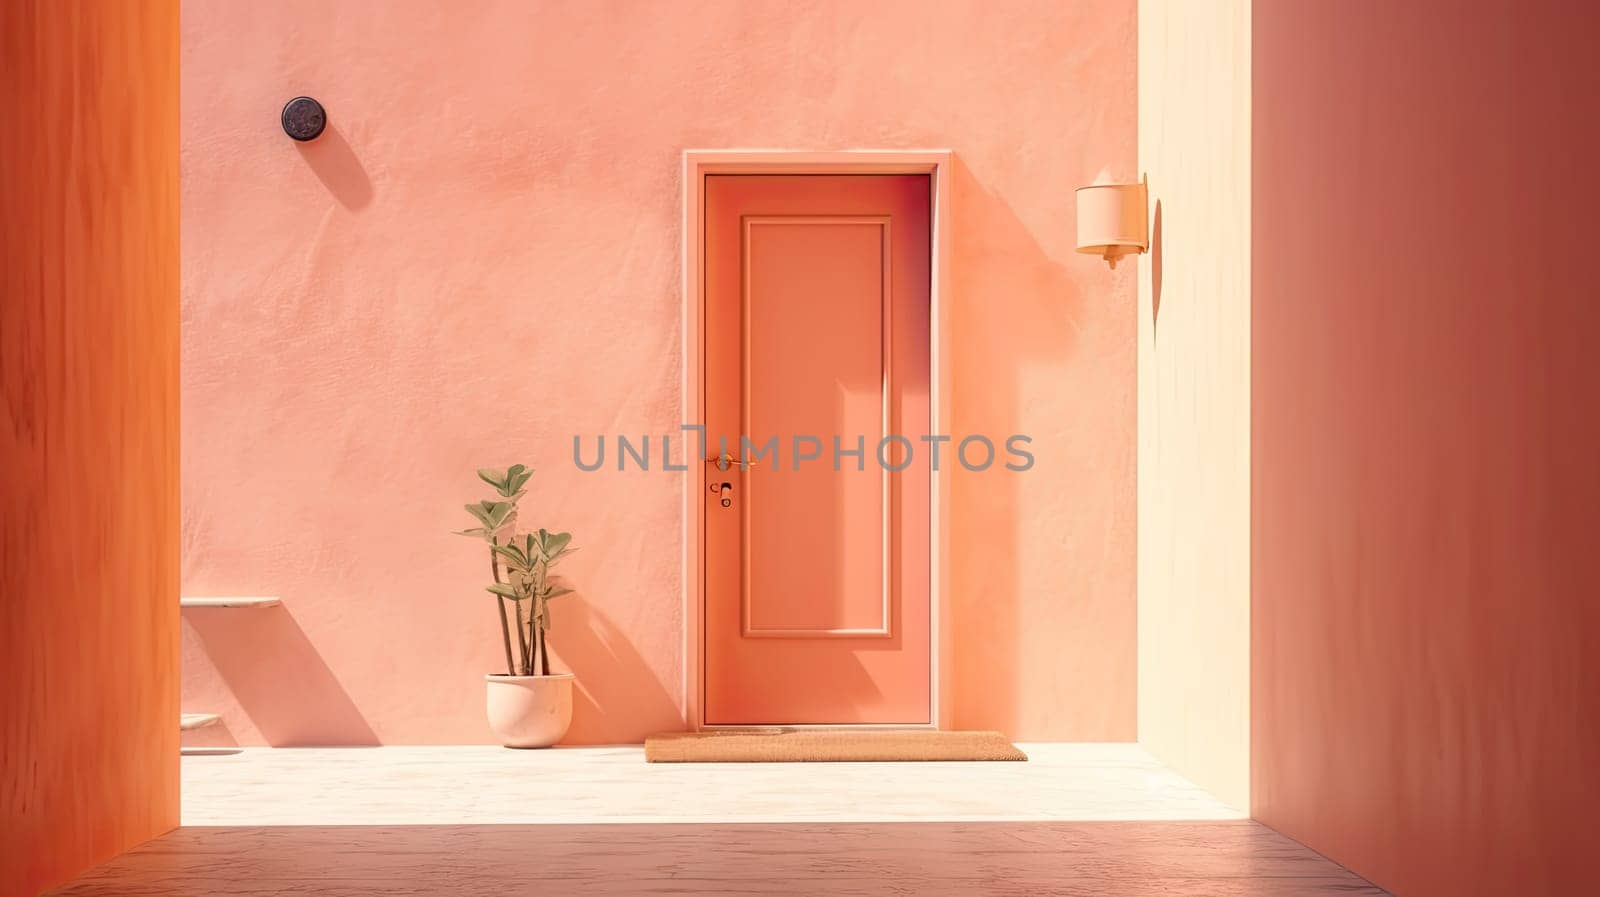 Plastered wall, door and shadows by cherezoff